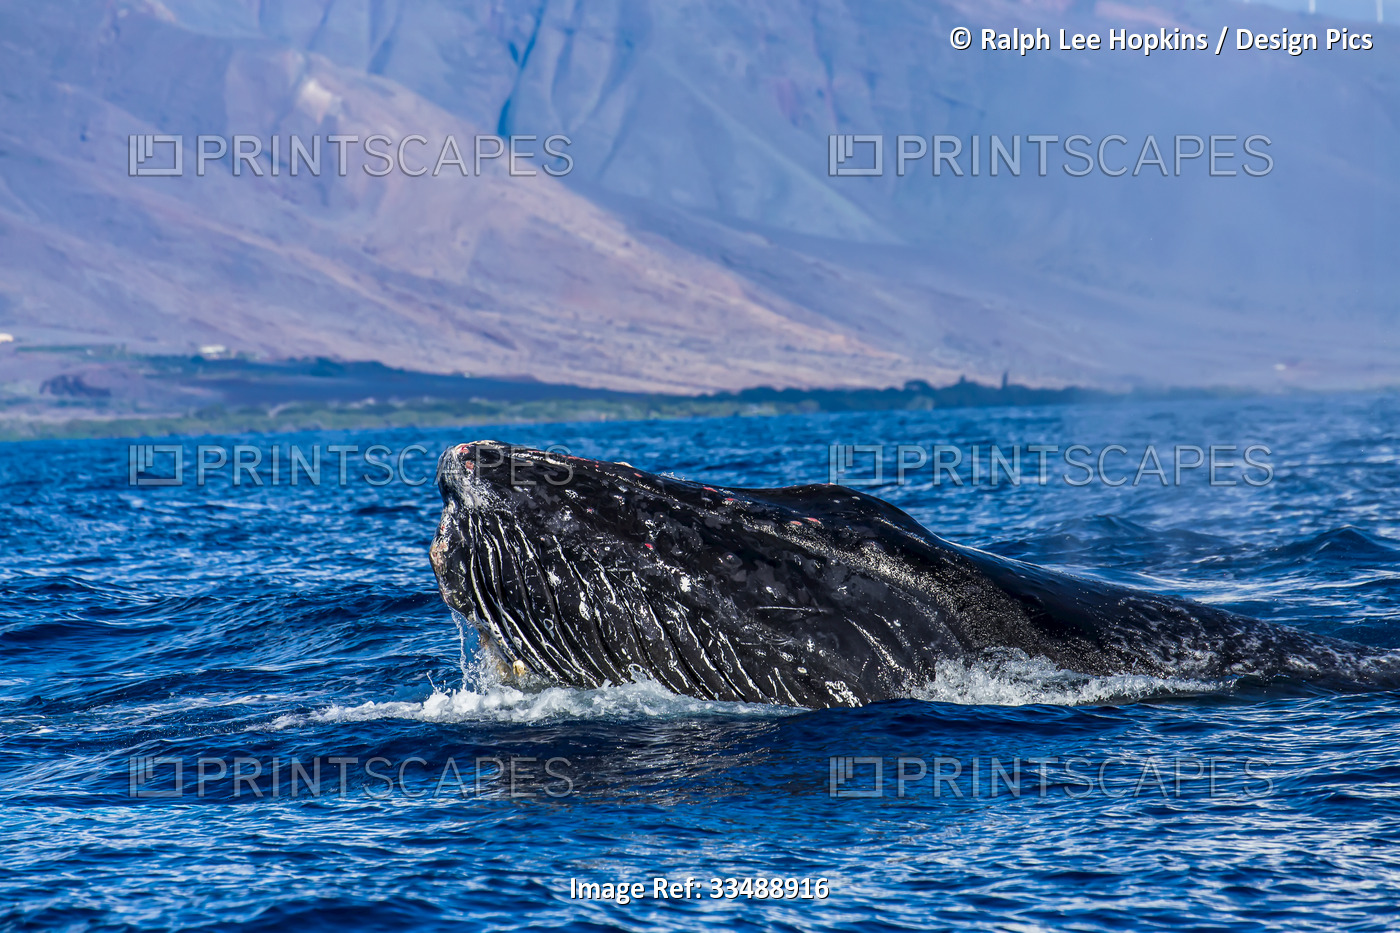 A humpback whale head lunges out of the Pacific Ocean.